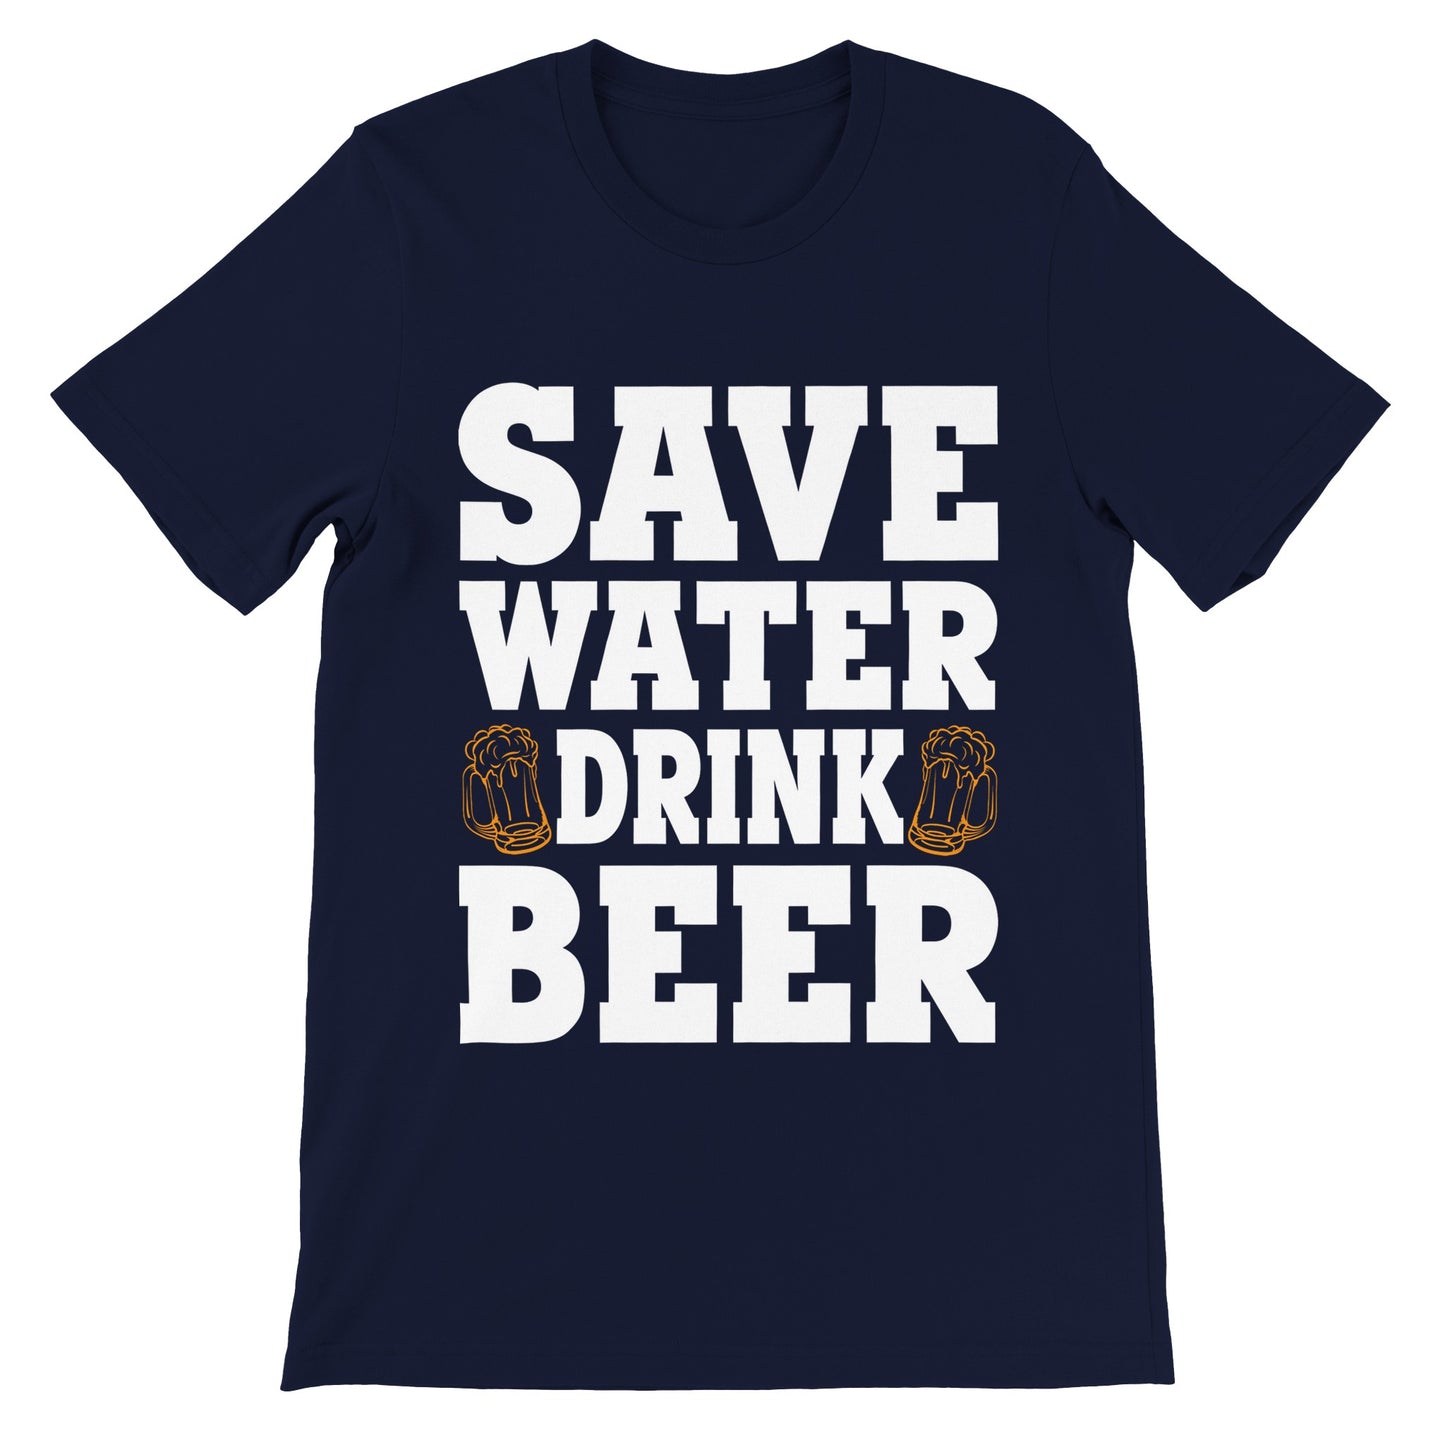 Funny T-Shirts - Save Water Drink Beer - Premium Unisex T-Shirt 